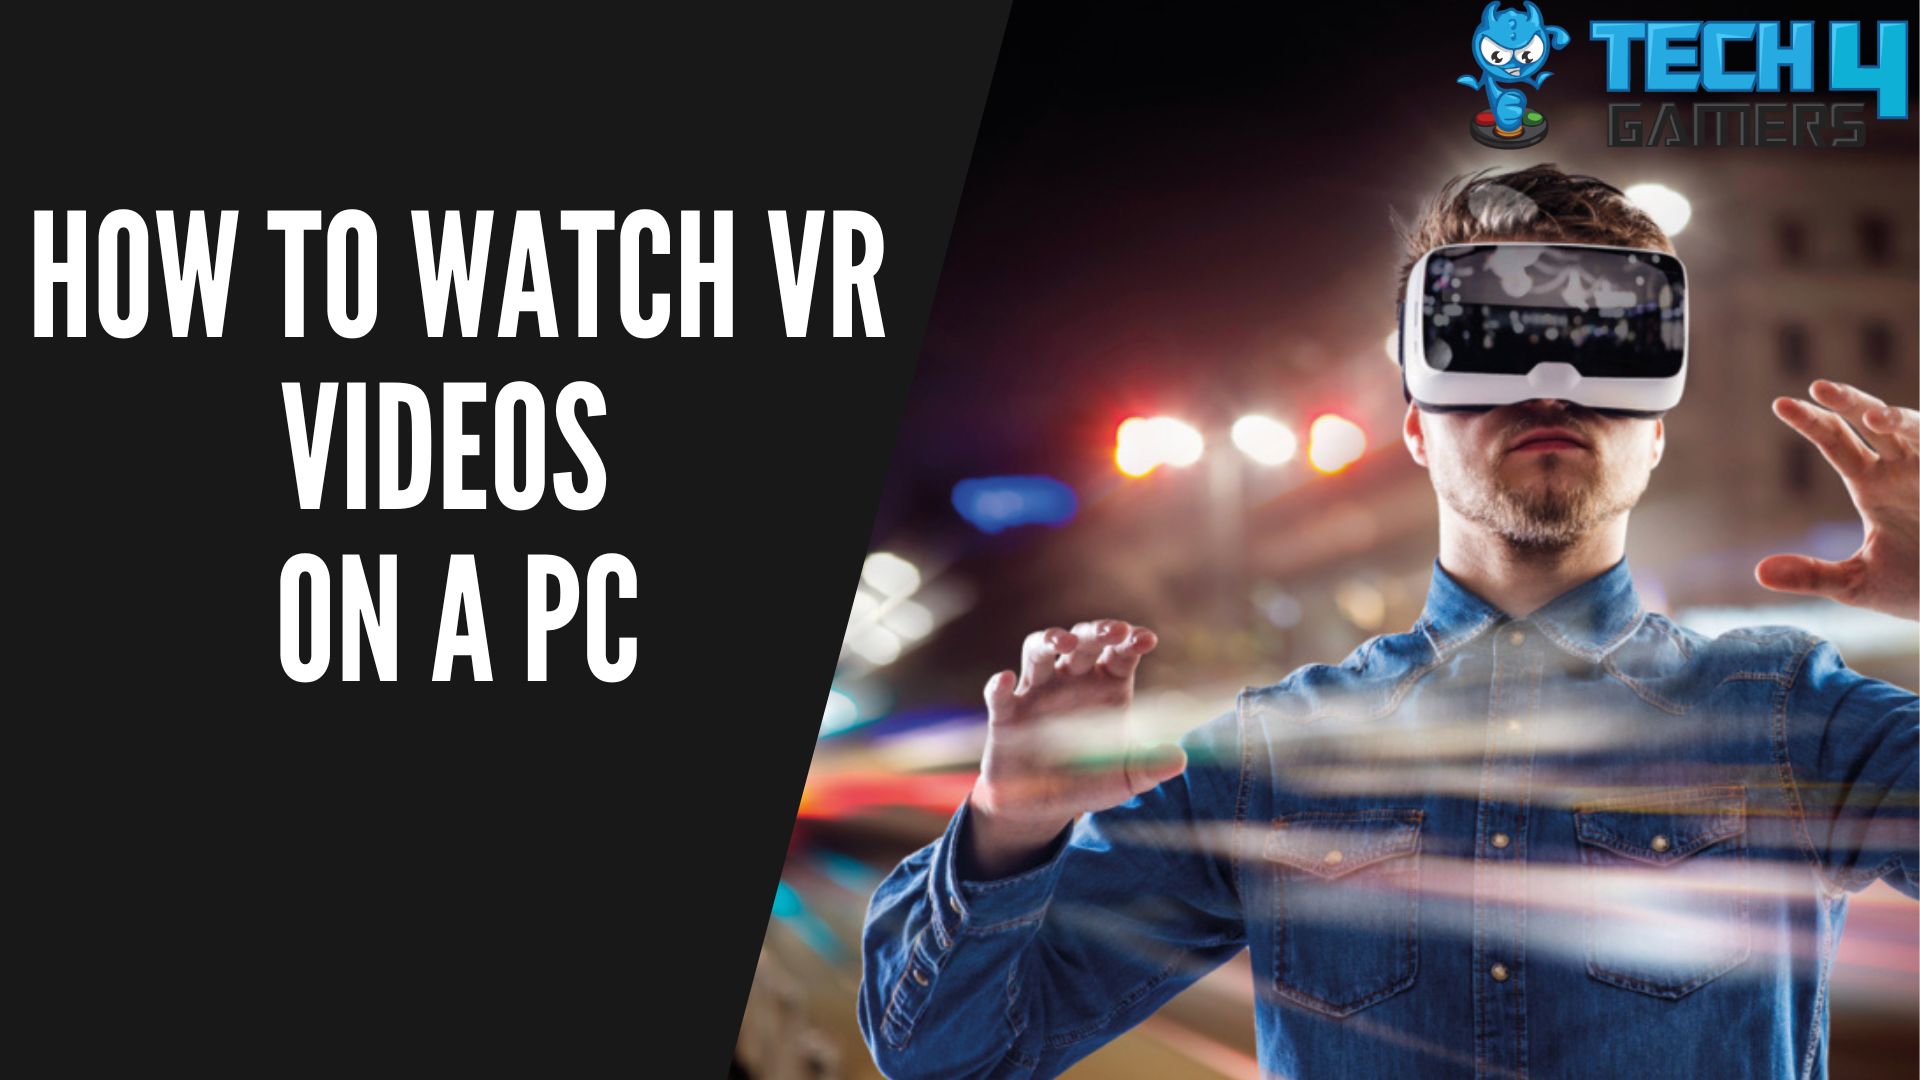 How To Watch VR Videos On PC [Ultimate